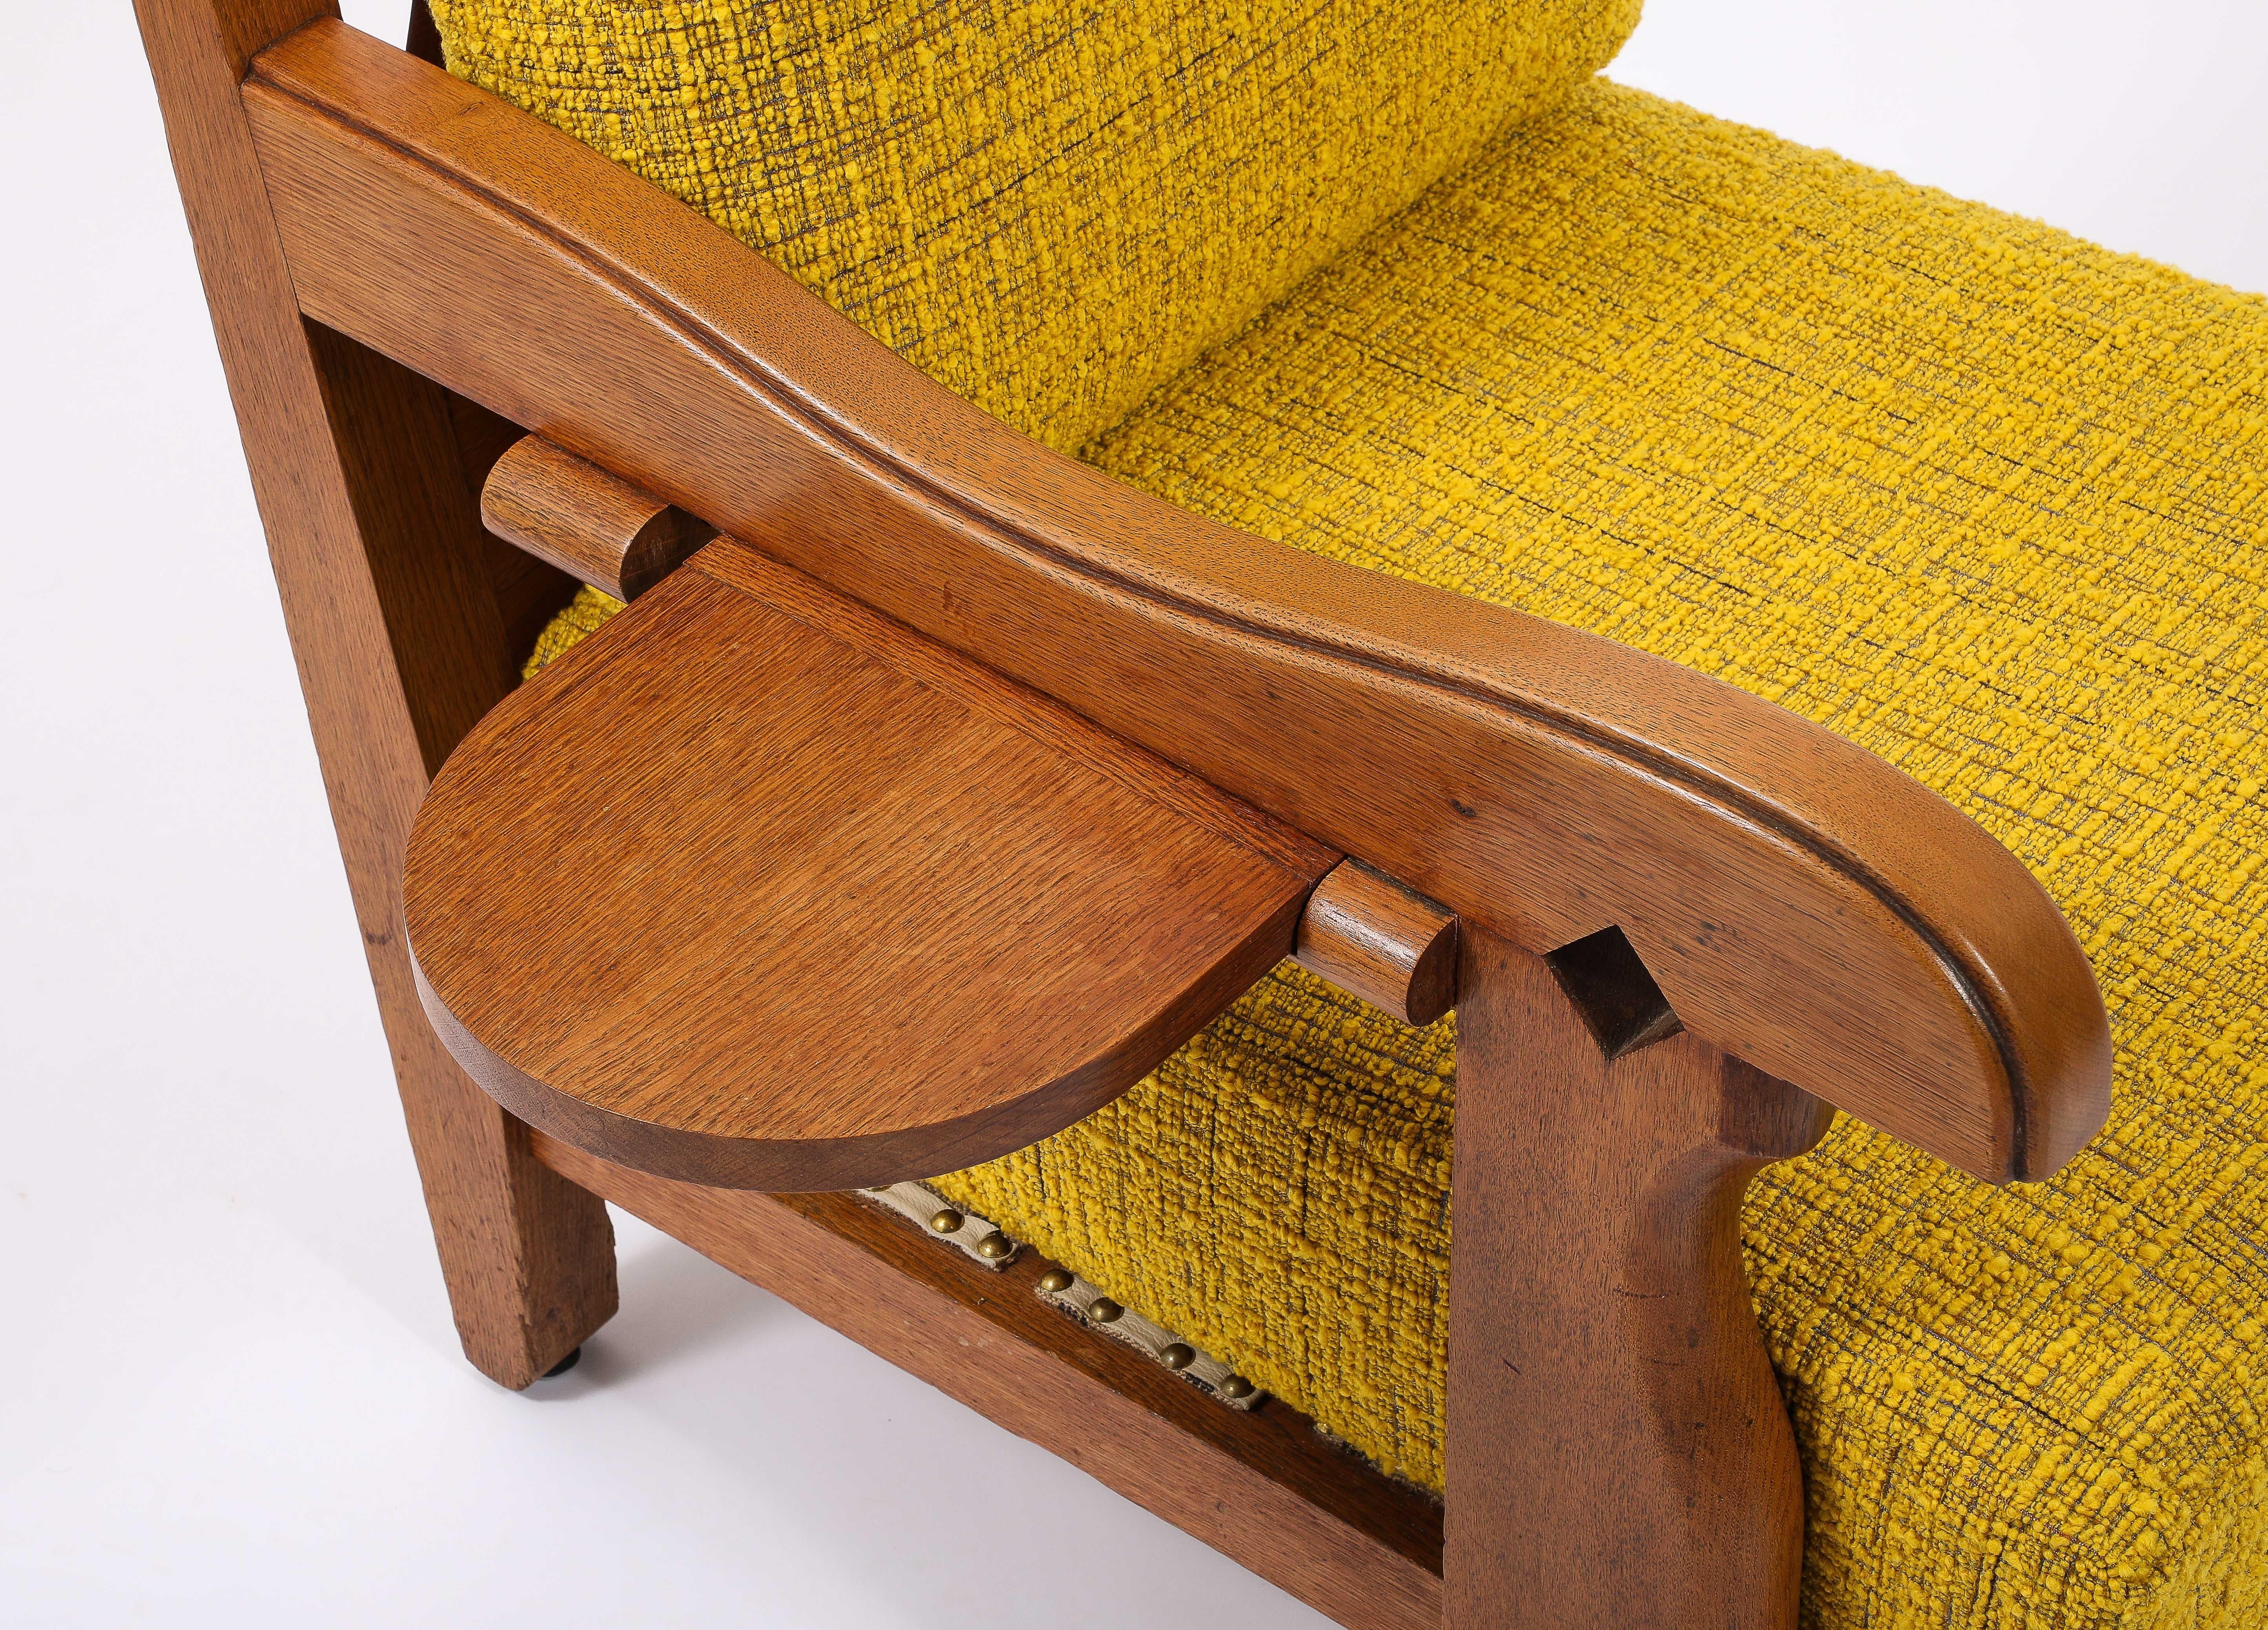 Large Oak & Yellow Wool Armchair with side Shelf, France 1950's For Sale 4